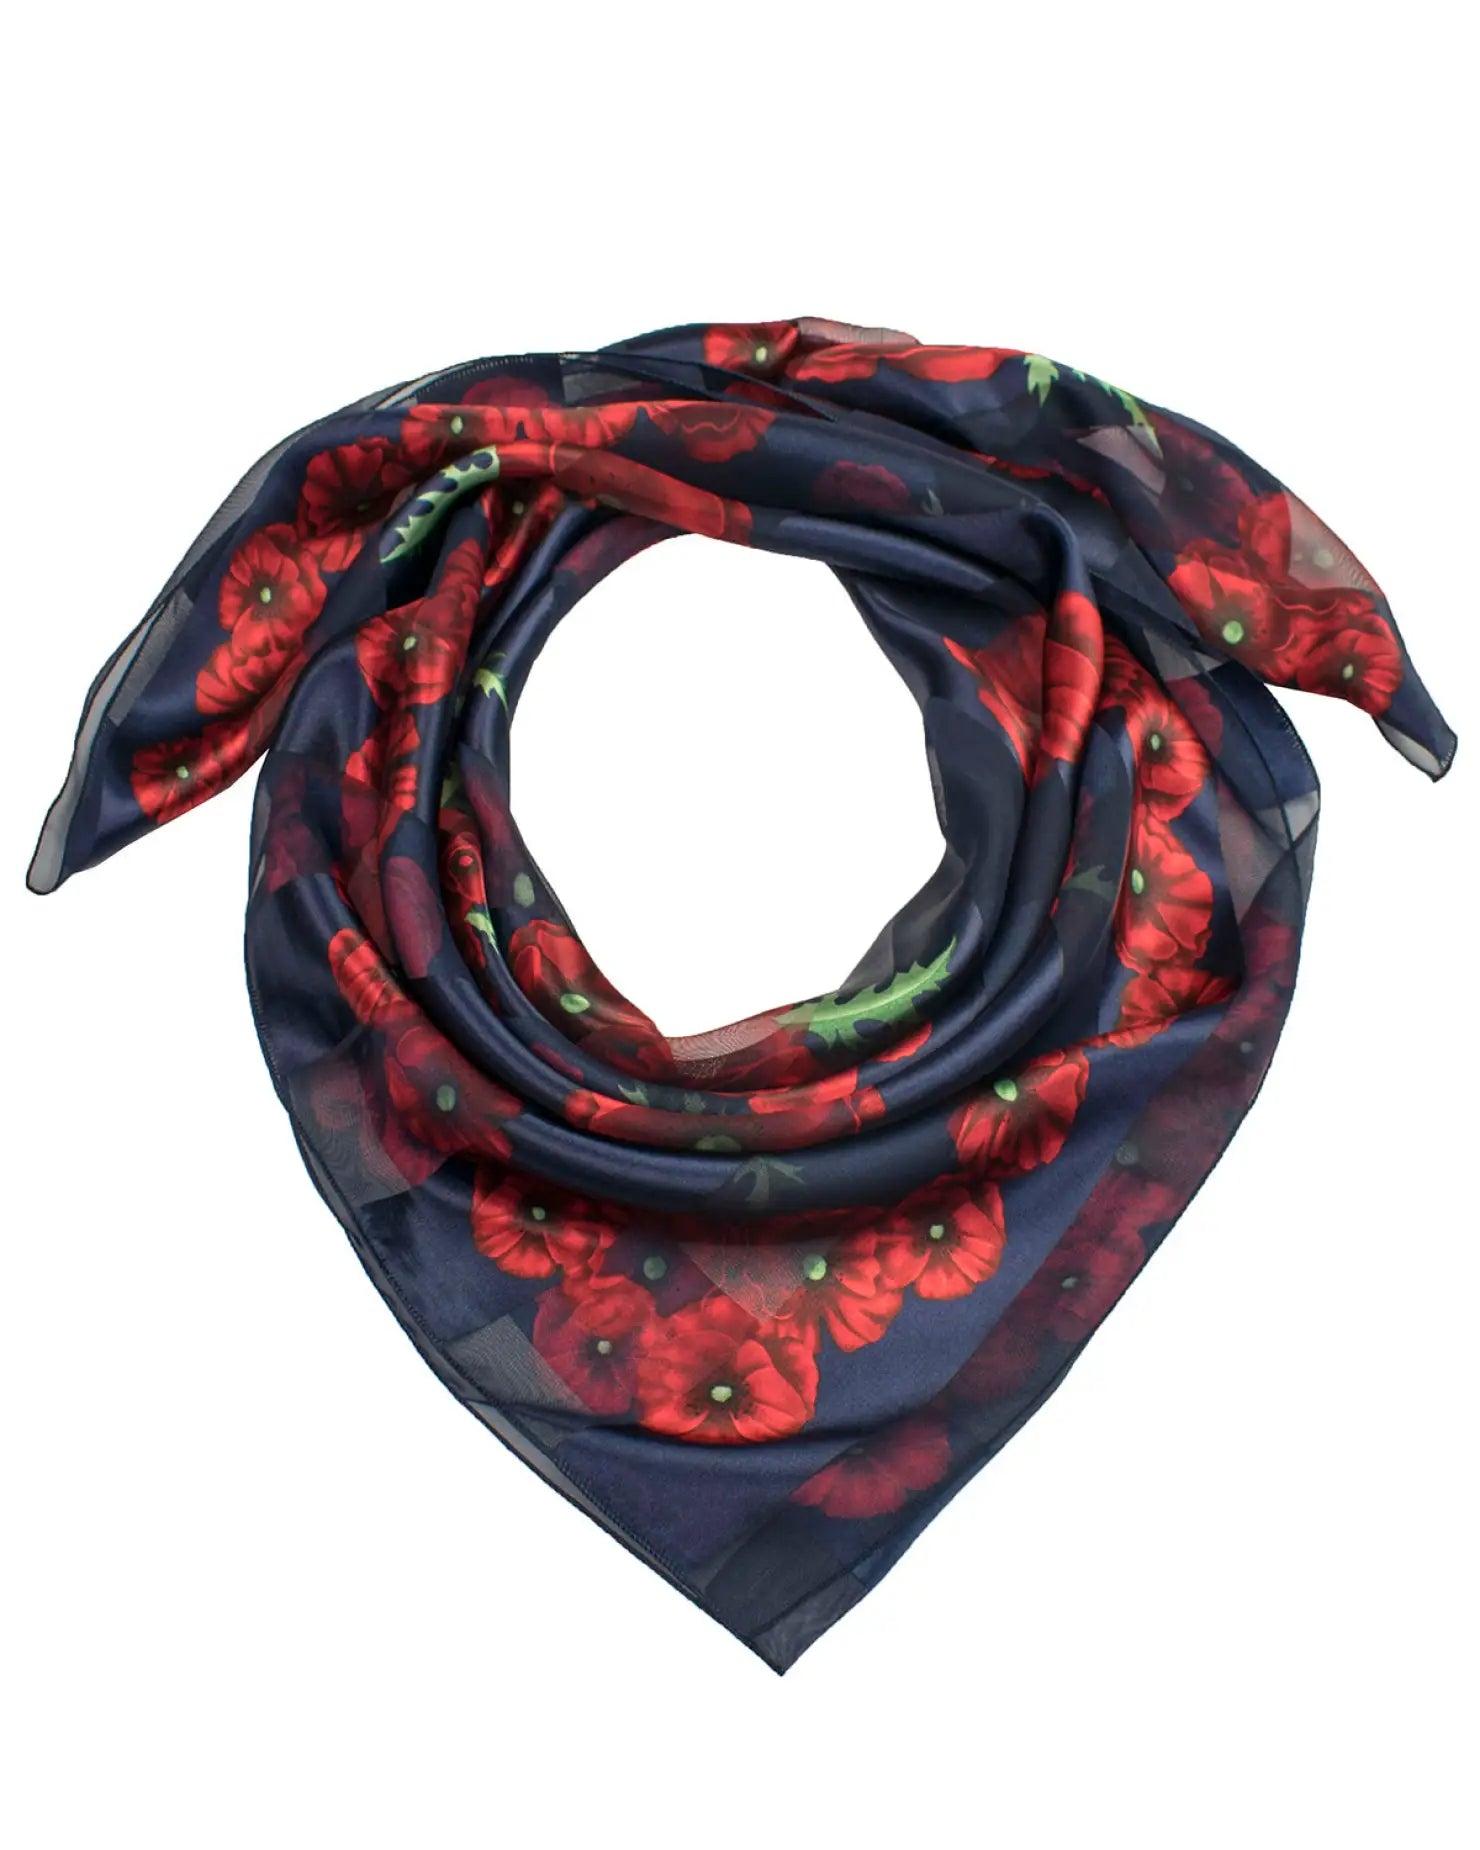 Large Square Poppy Scarf with Red Flowers for Remembrance Day